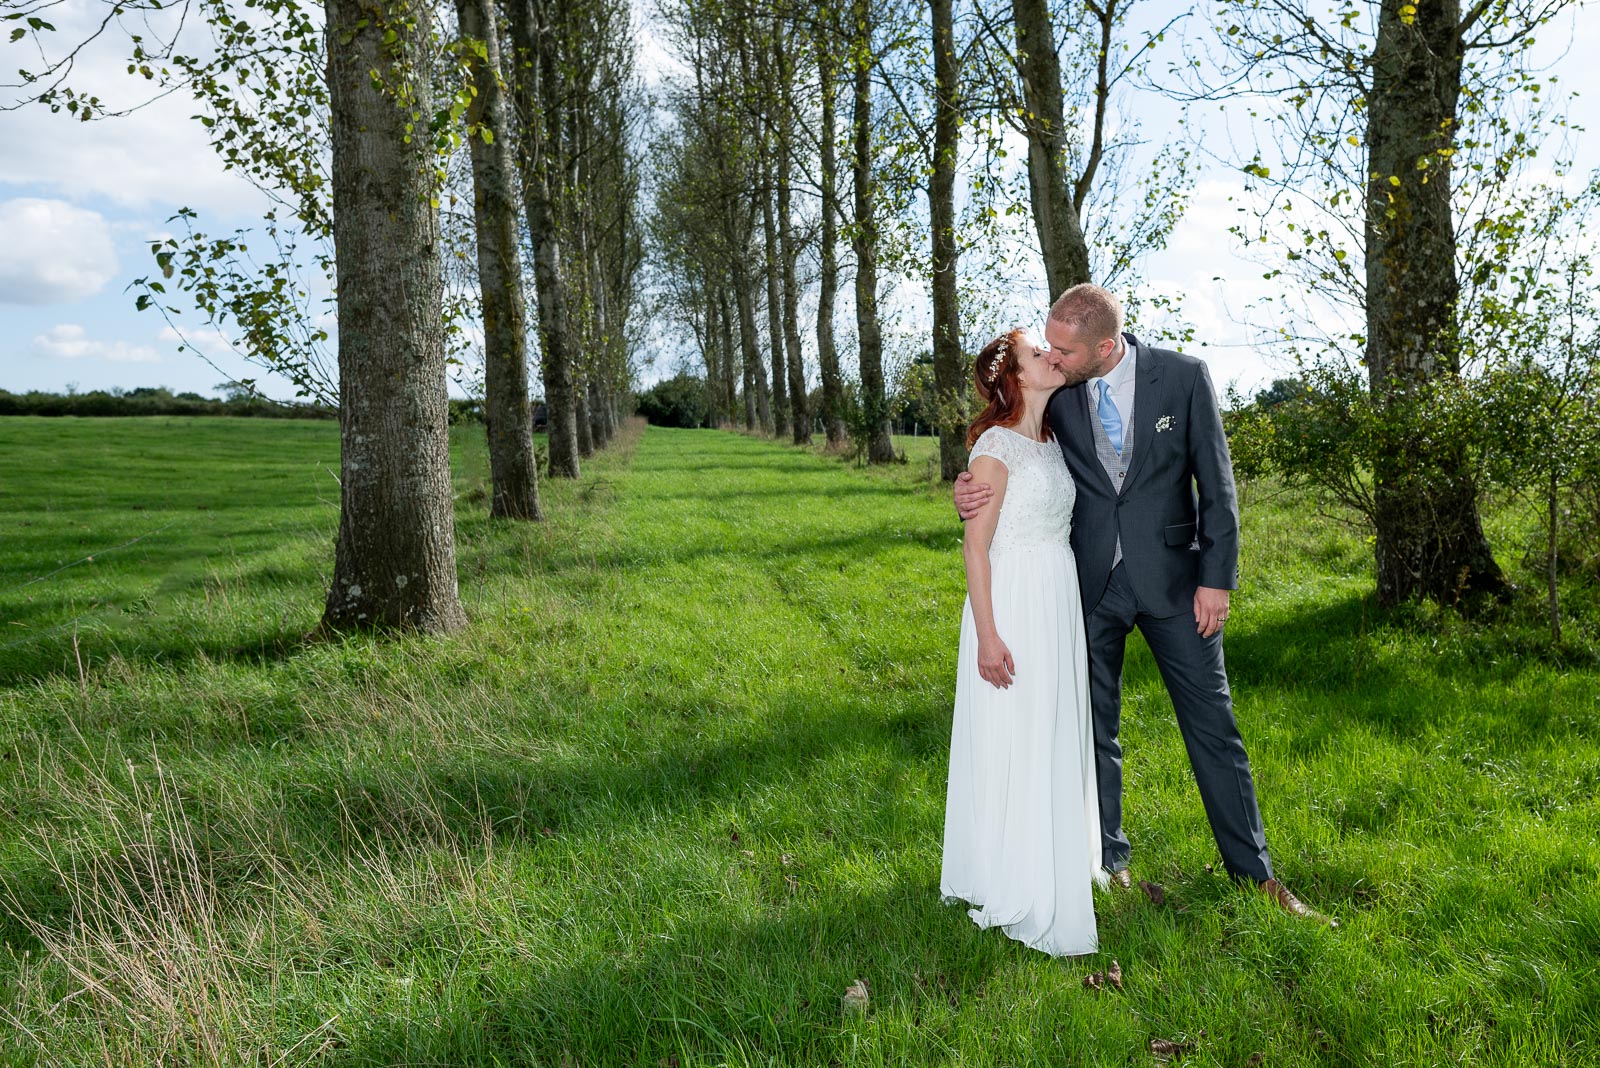 Adrienn and Lee embrace on front of a line of trees on the grounds of Milward Farm in Lewes after their Wedding on the estate.